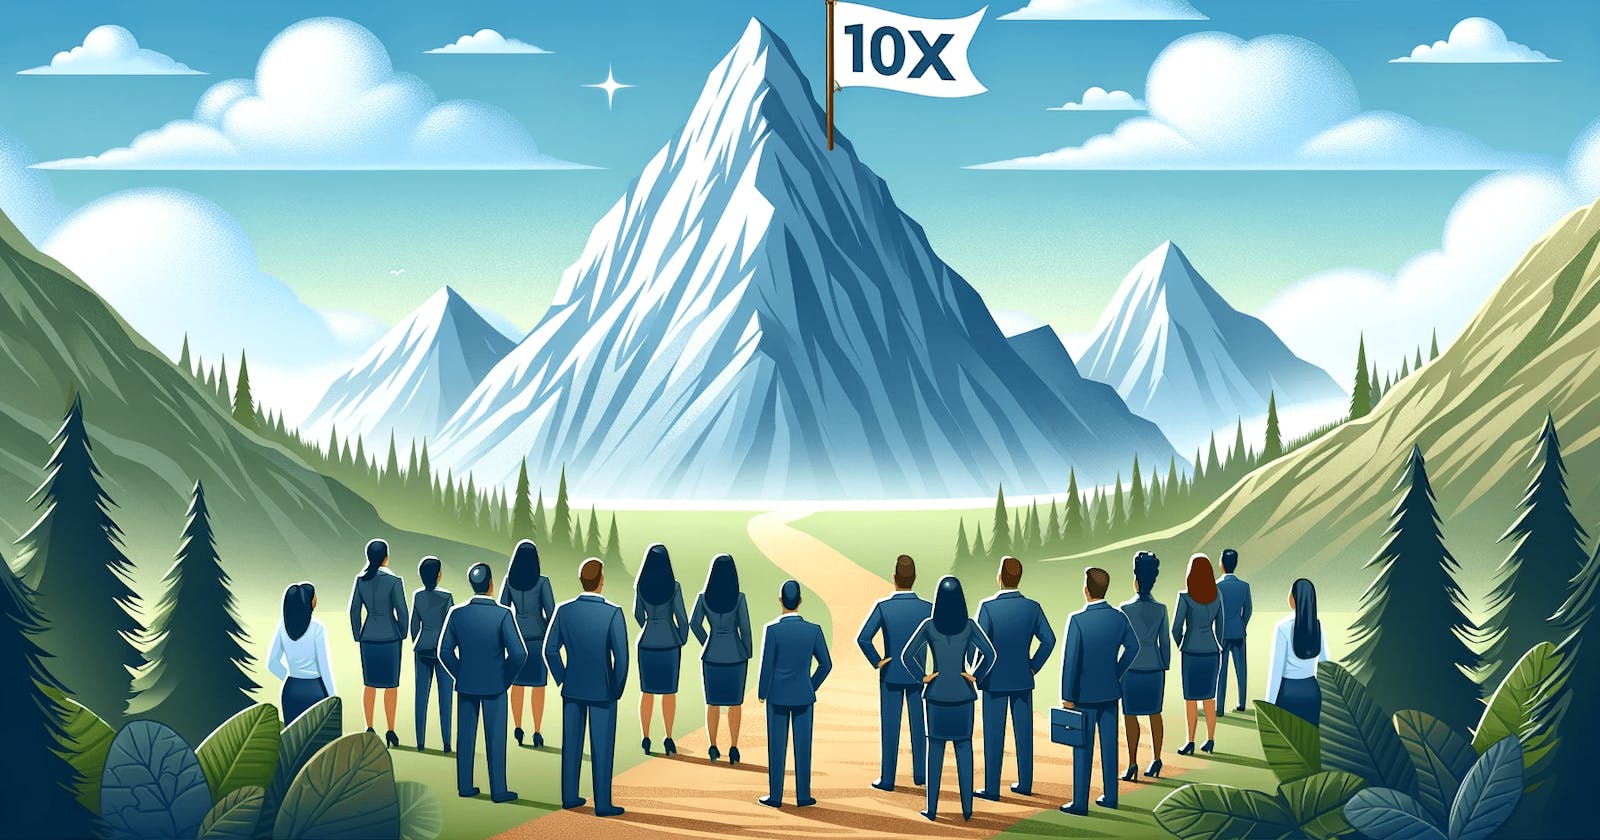 The philosophy of the 10X way